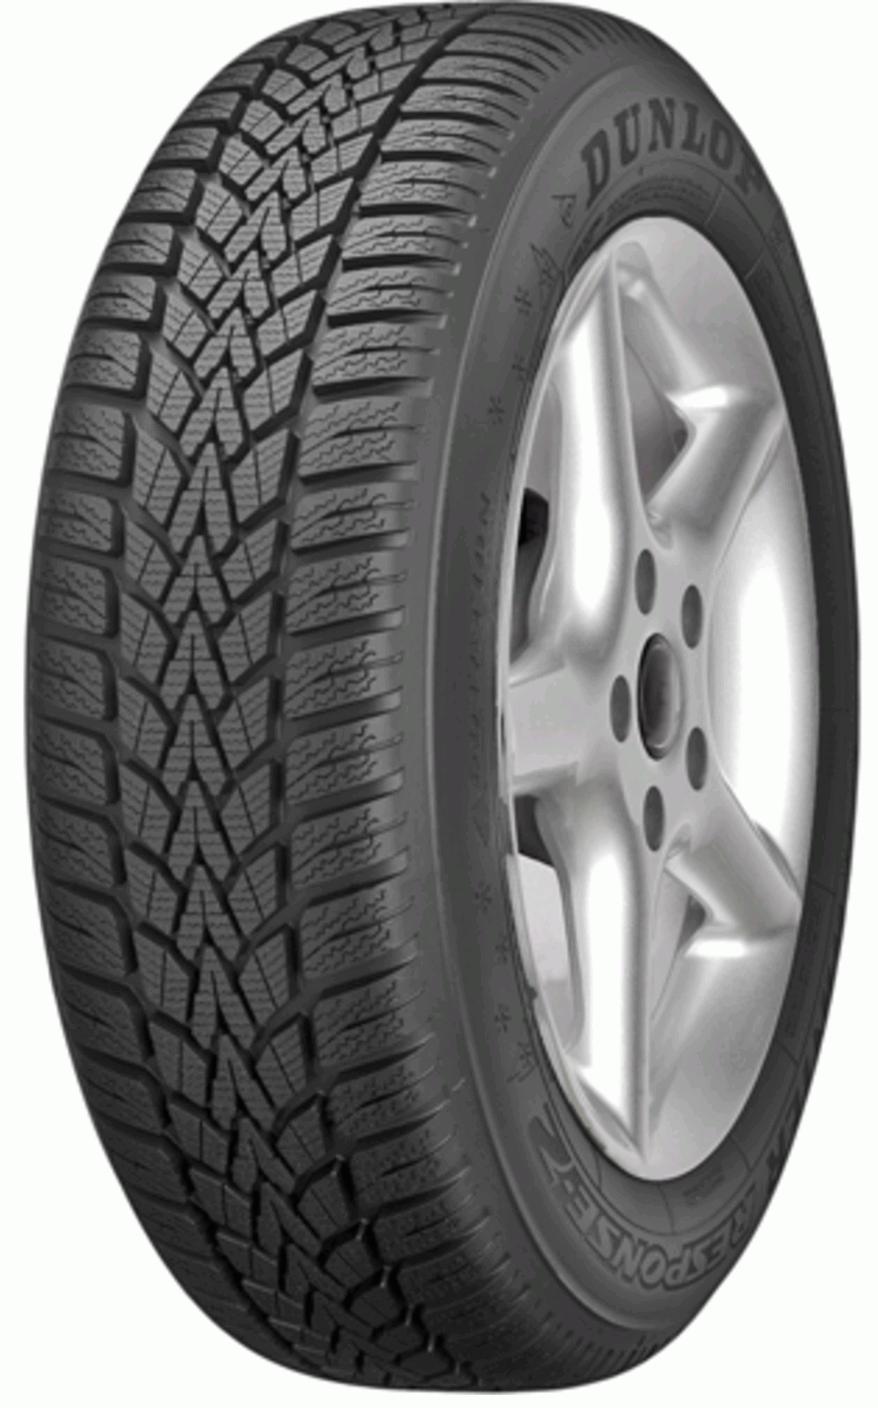 Tests Tire 2 Reviews and Response Dunlop - Winter